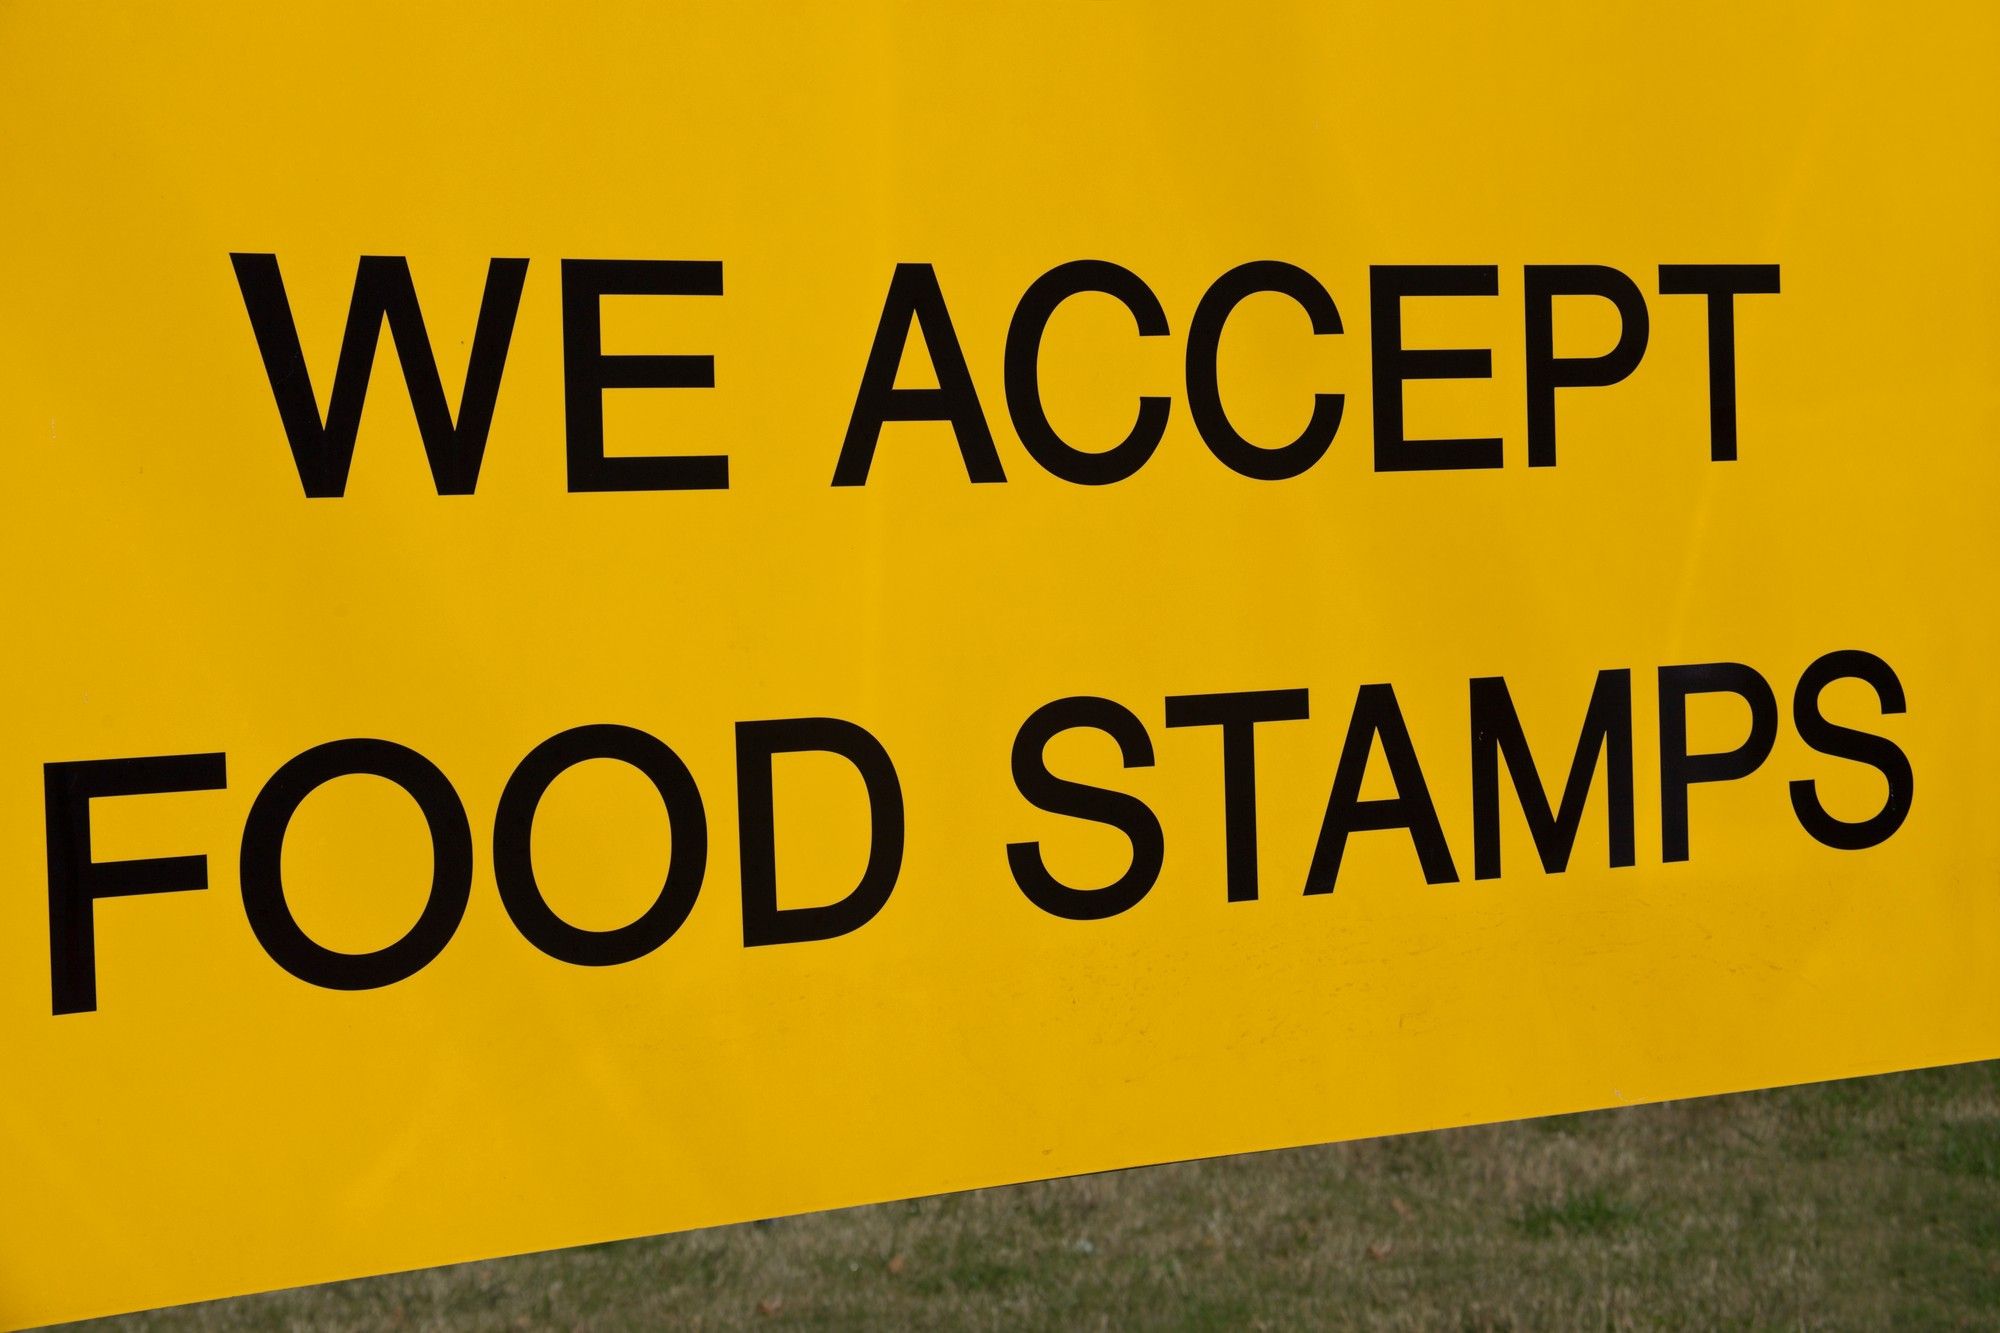 Food stamps in California are allegedly reduced unnlawfully.